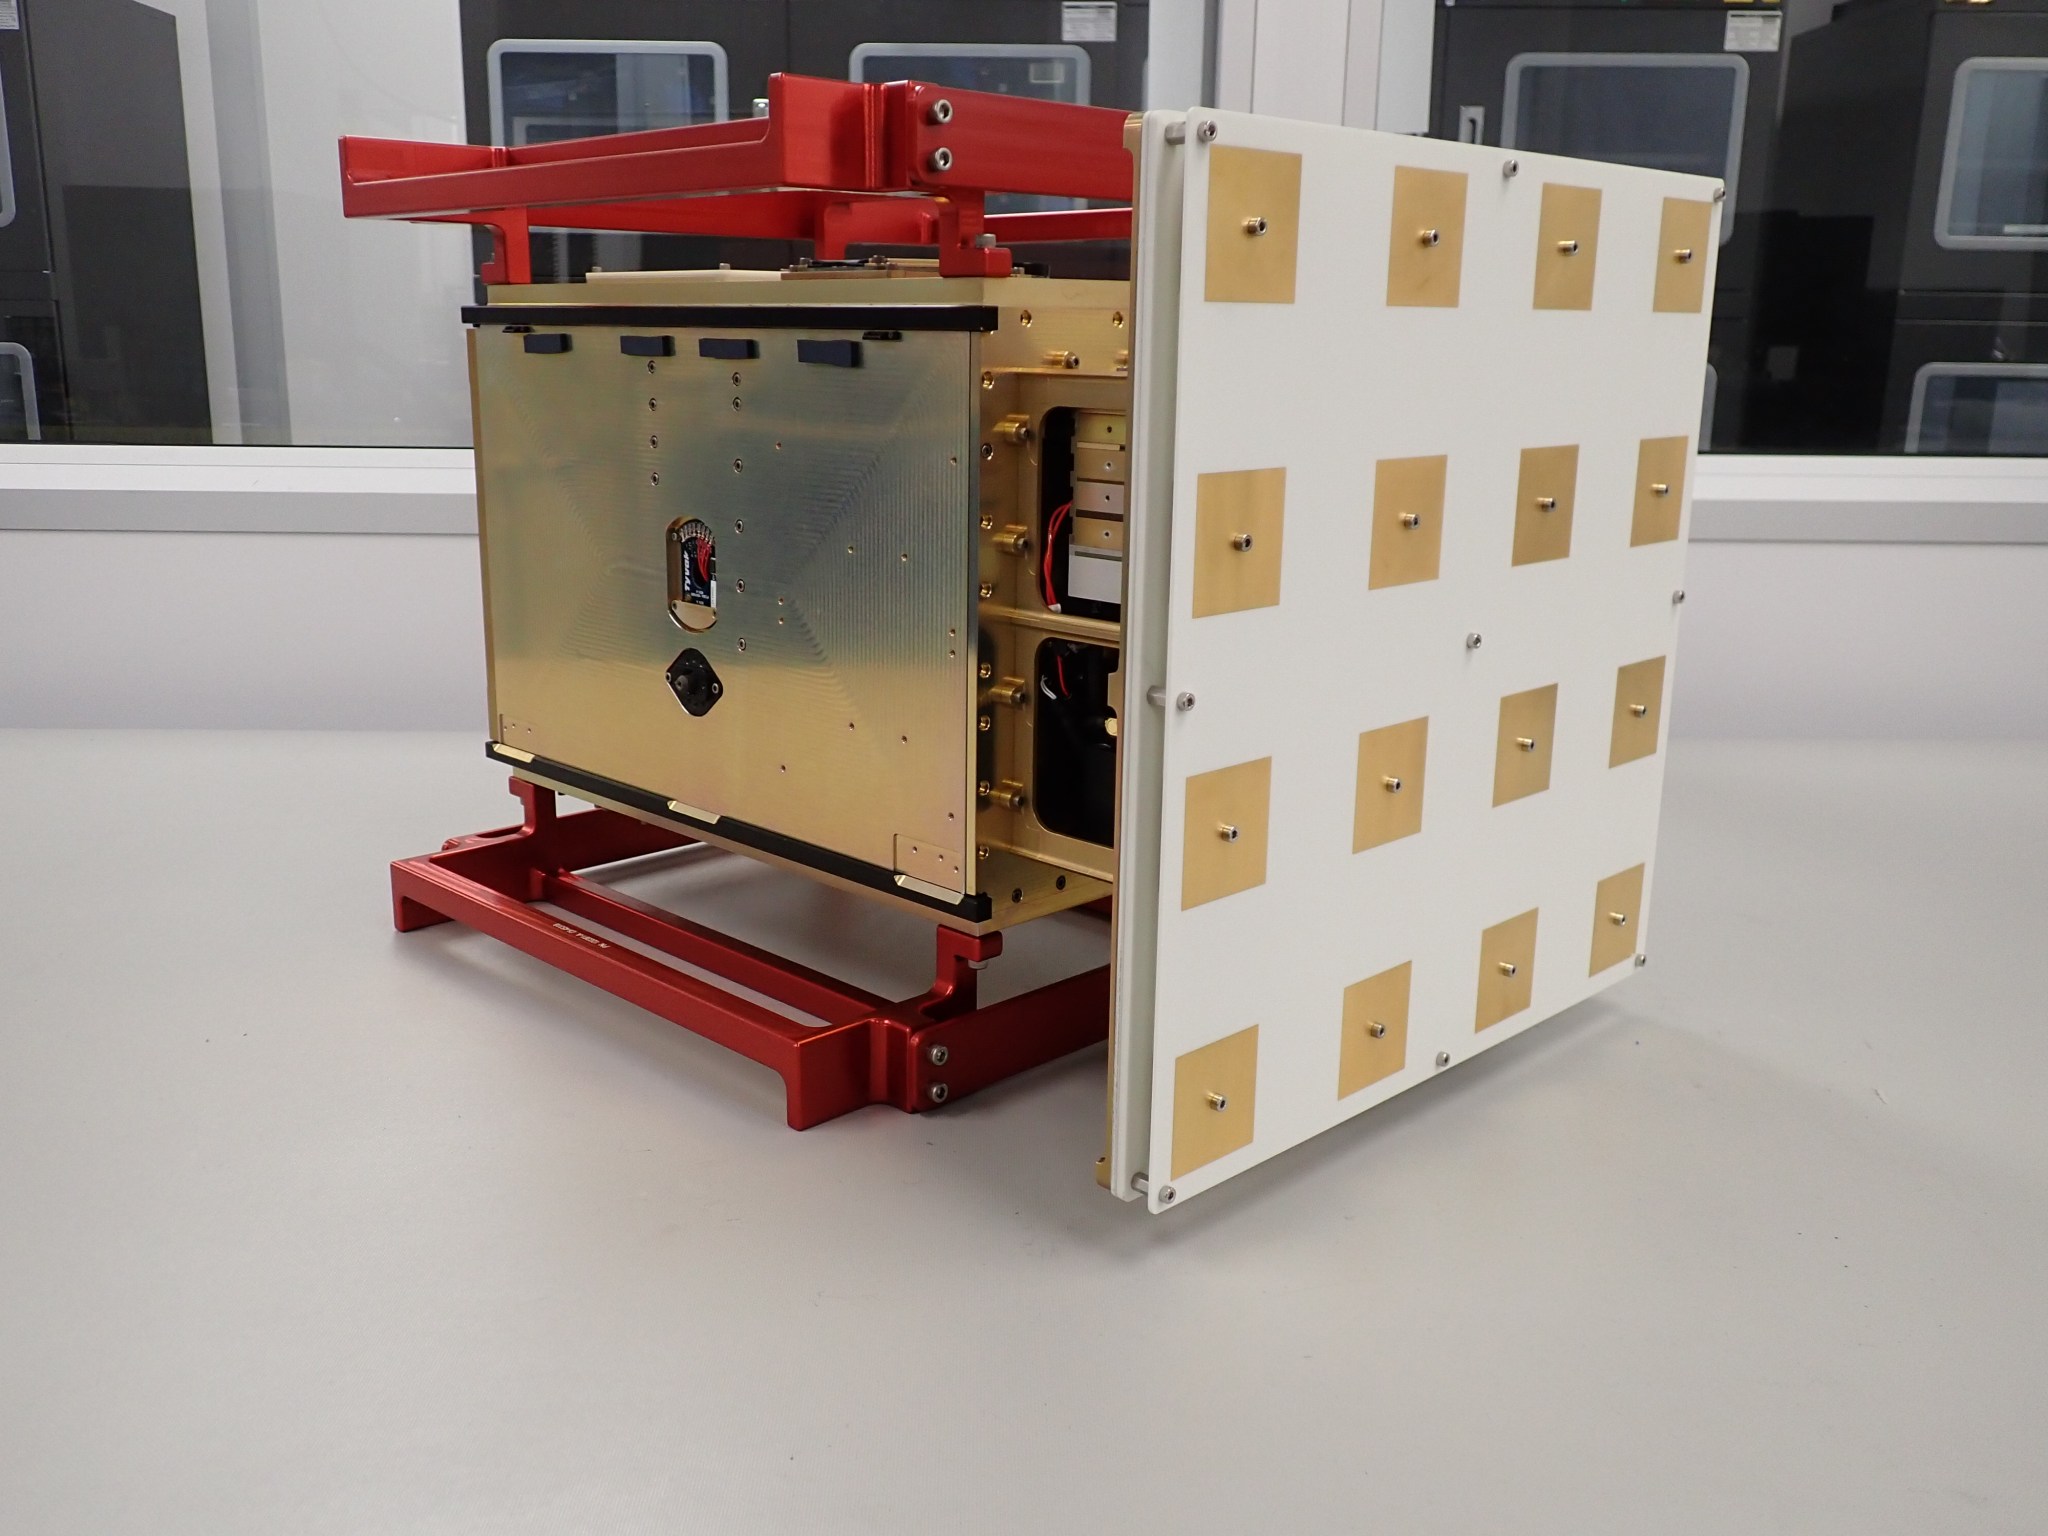 CAPSTONE’s CubeSat is partially integrated. 